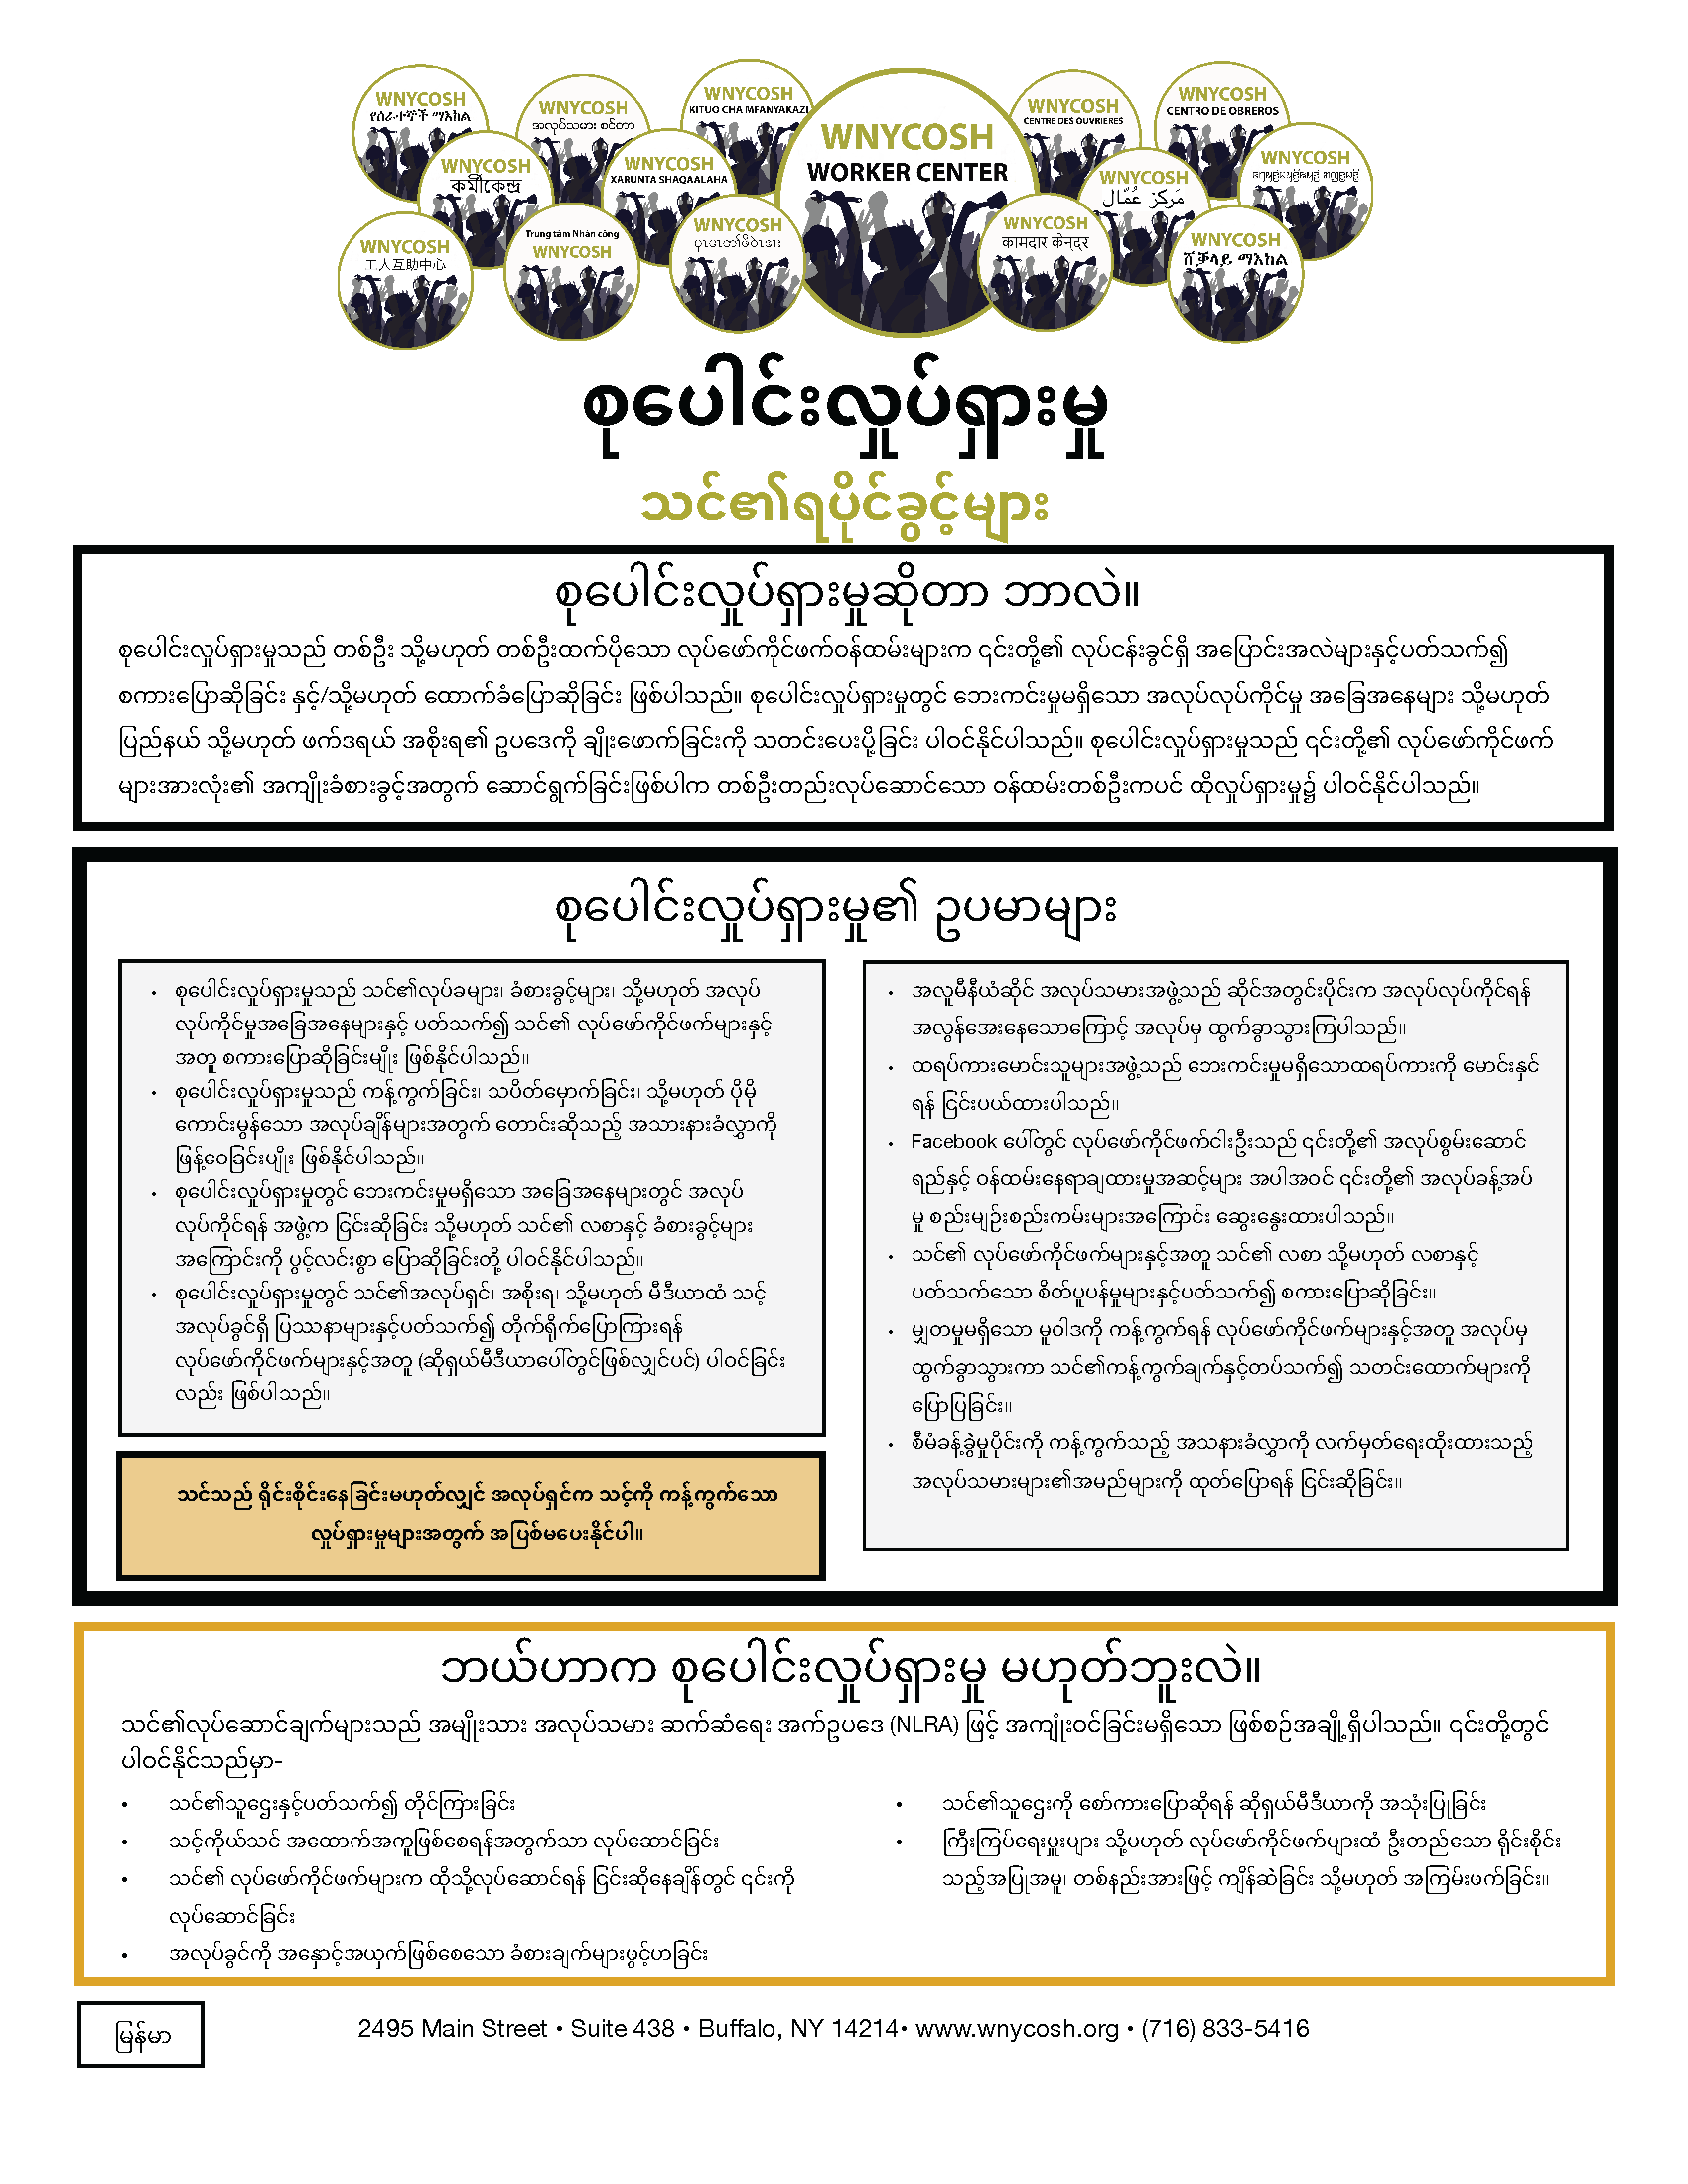 Thumbnail for Concerted Activity Factsheet in Burmese